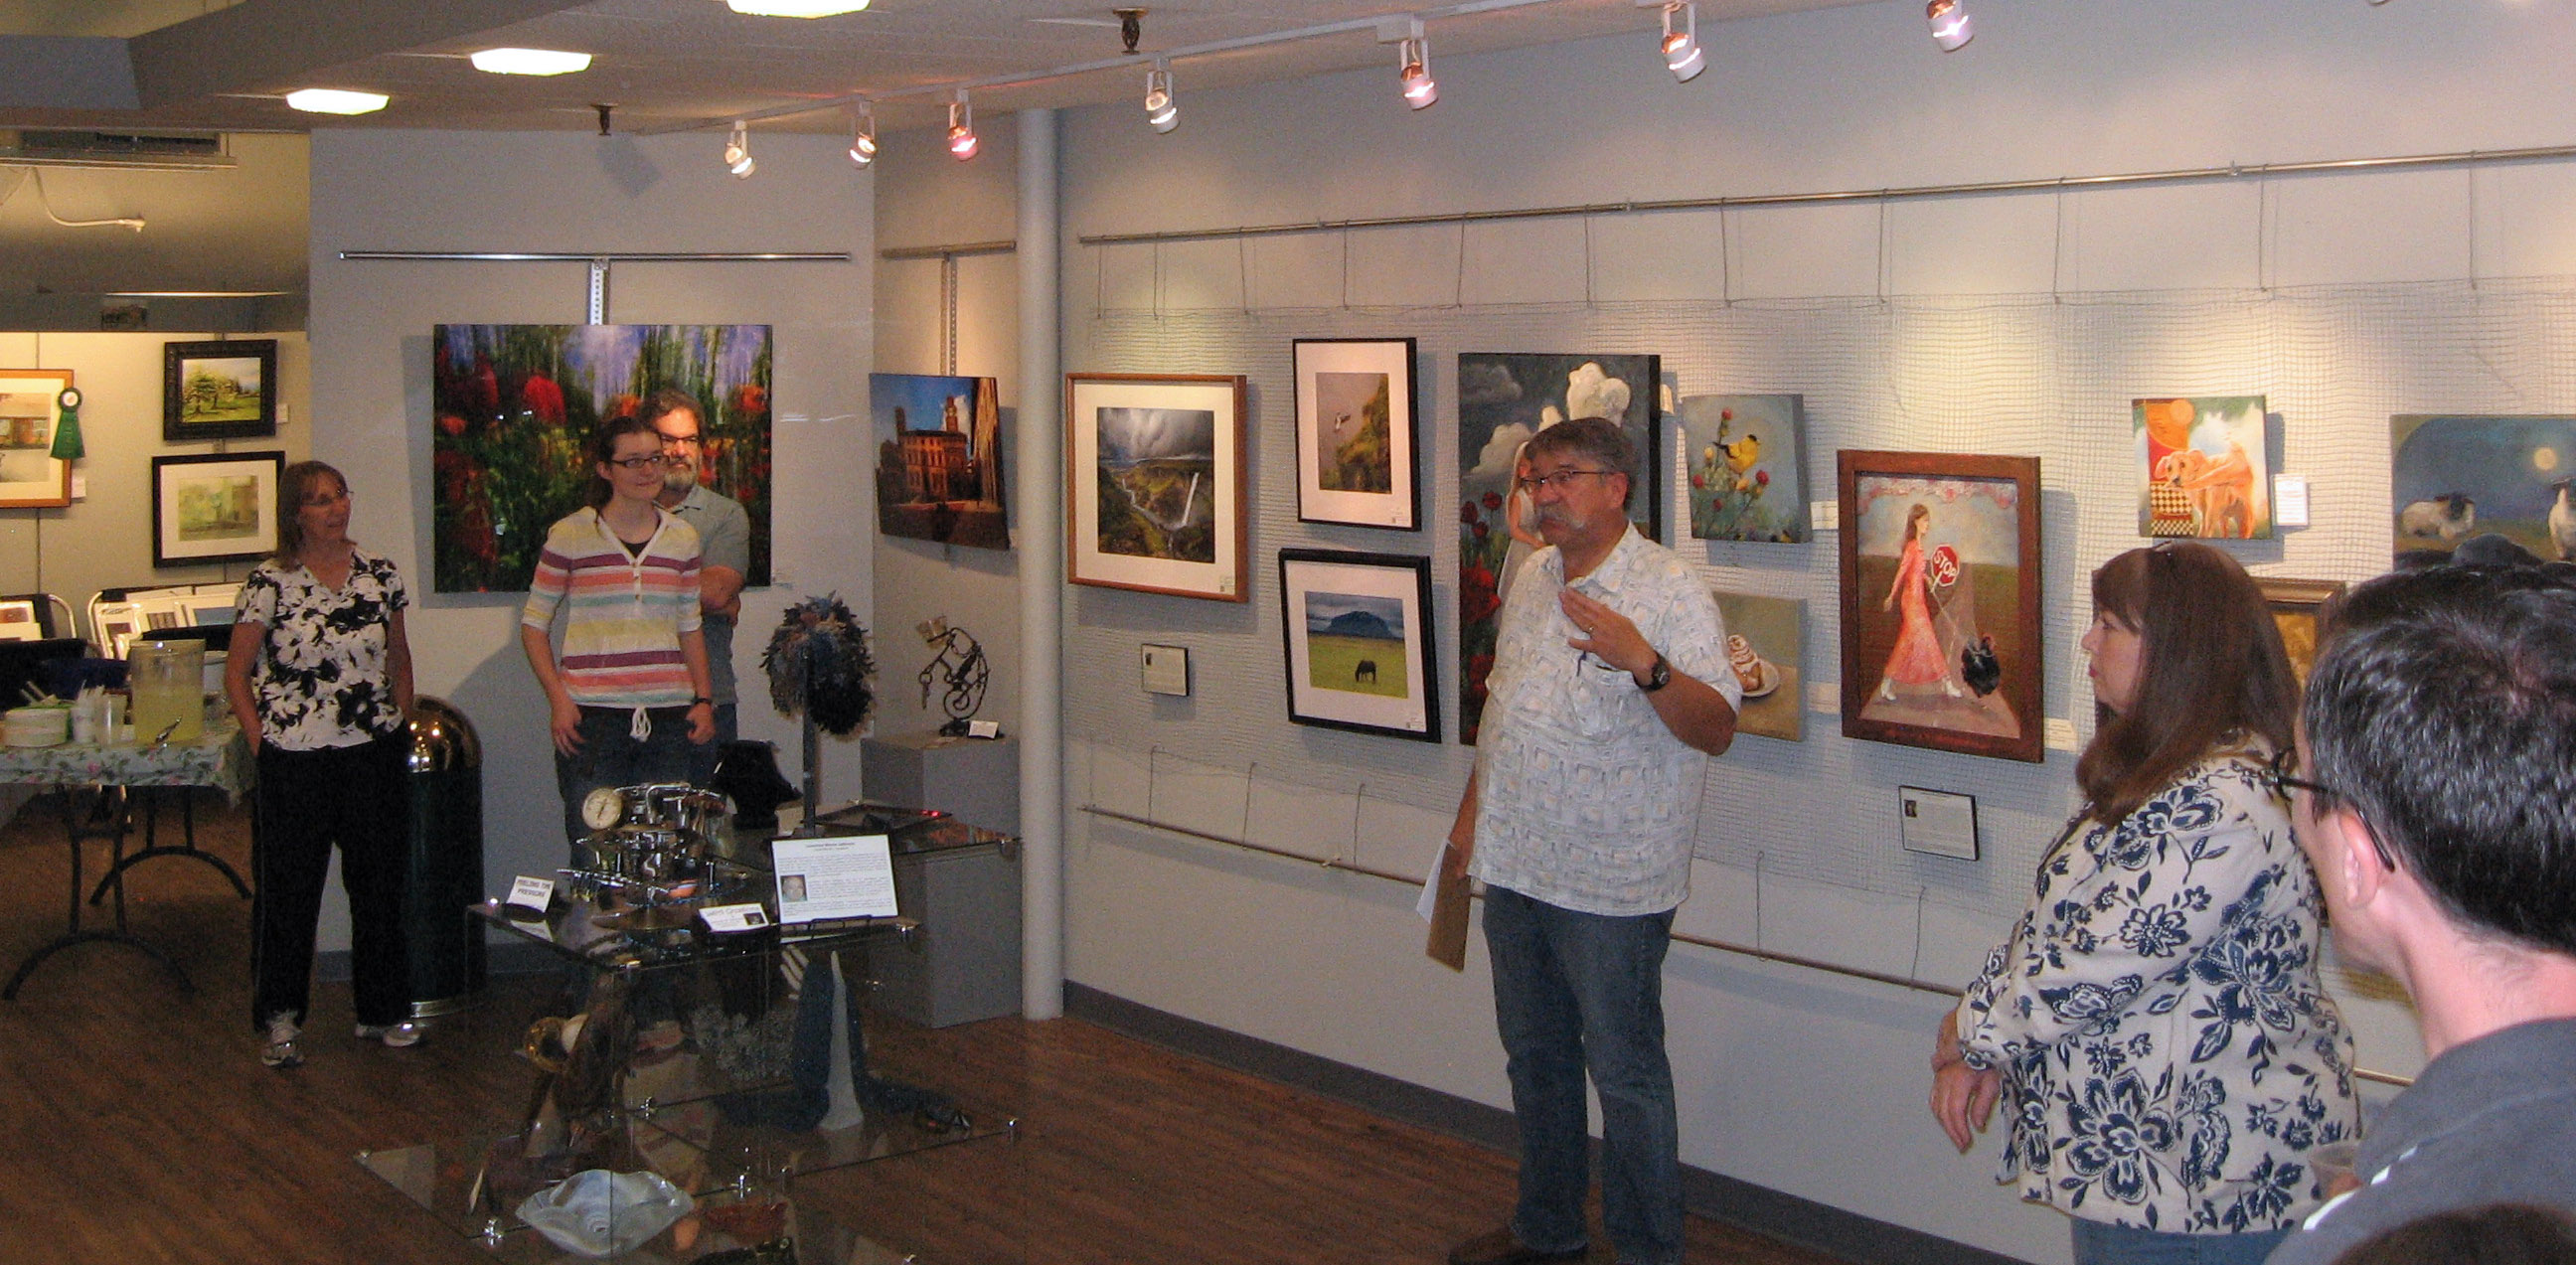 A crowd inside the gallery, all focused on artist Blaine Clayton.